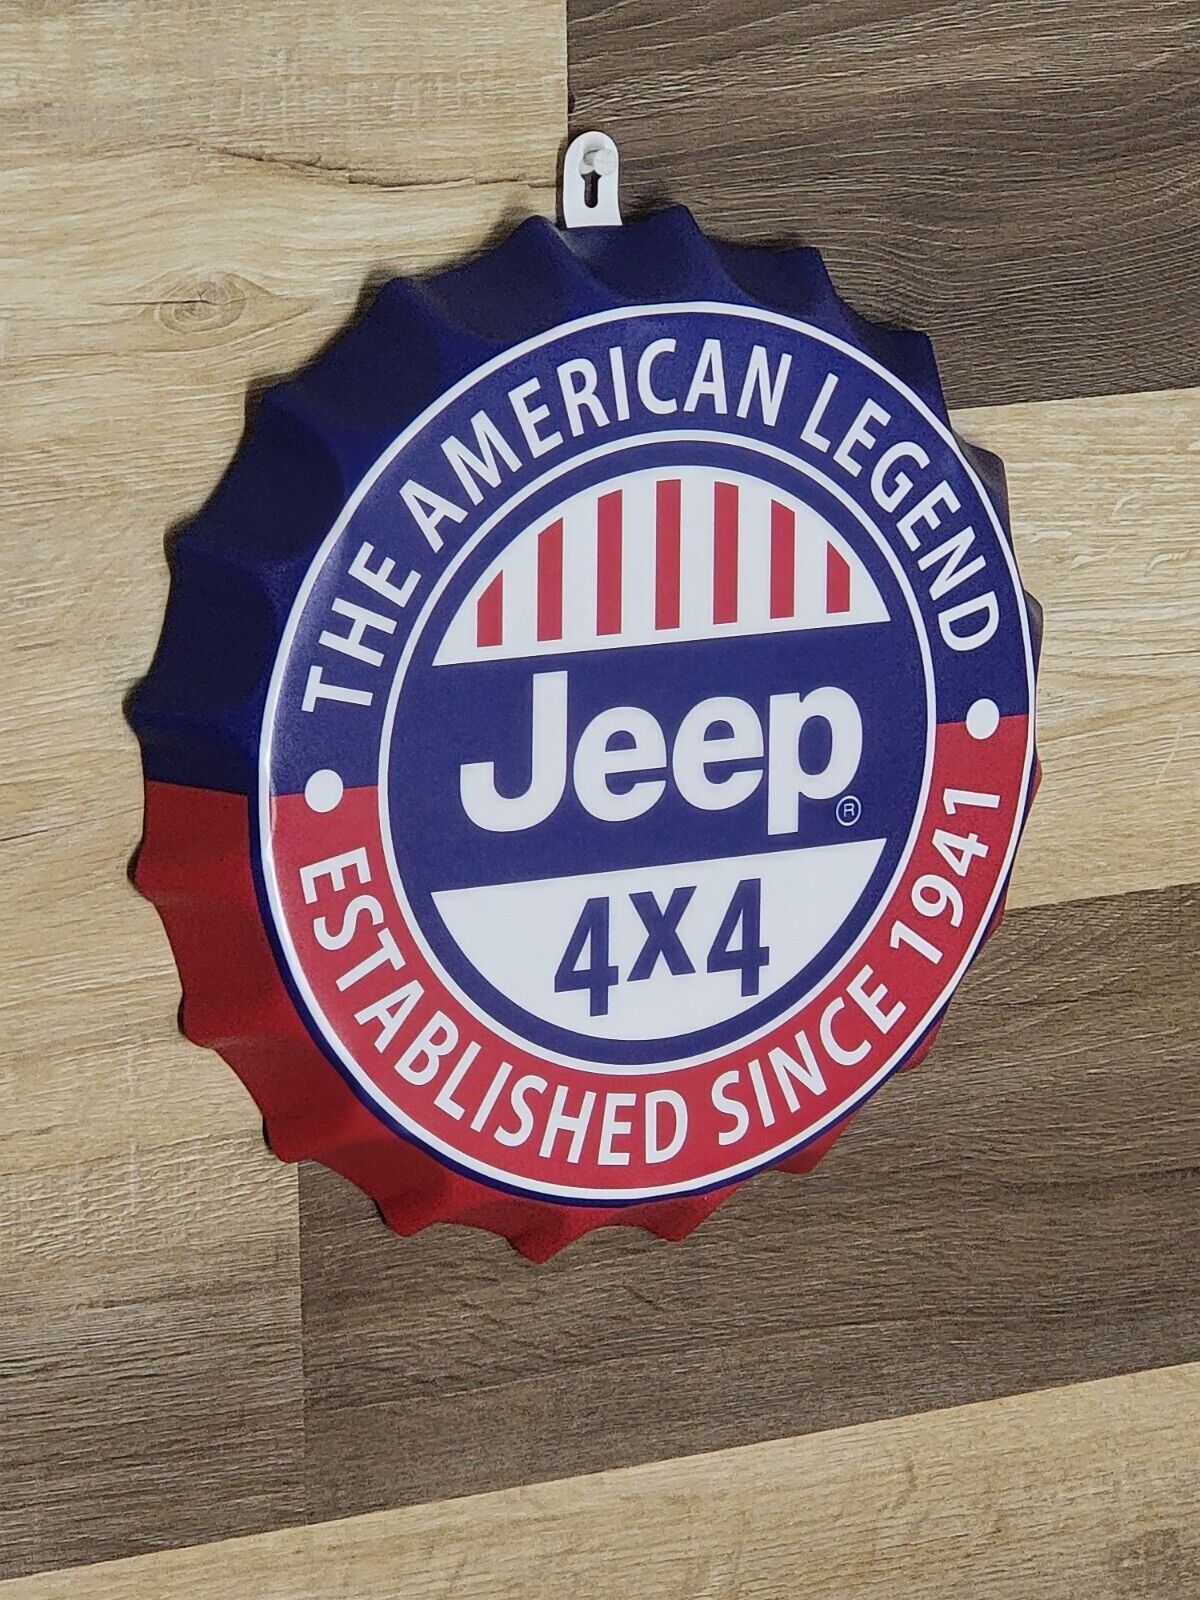 Jeep The American Legend  Metal Sign  Vintage Garage Wall Decor Jeep Metal Sign 